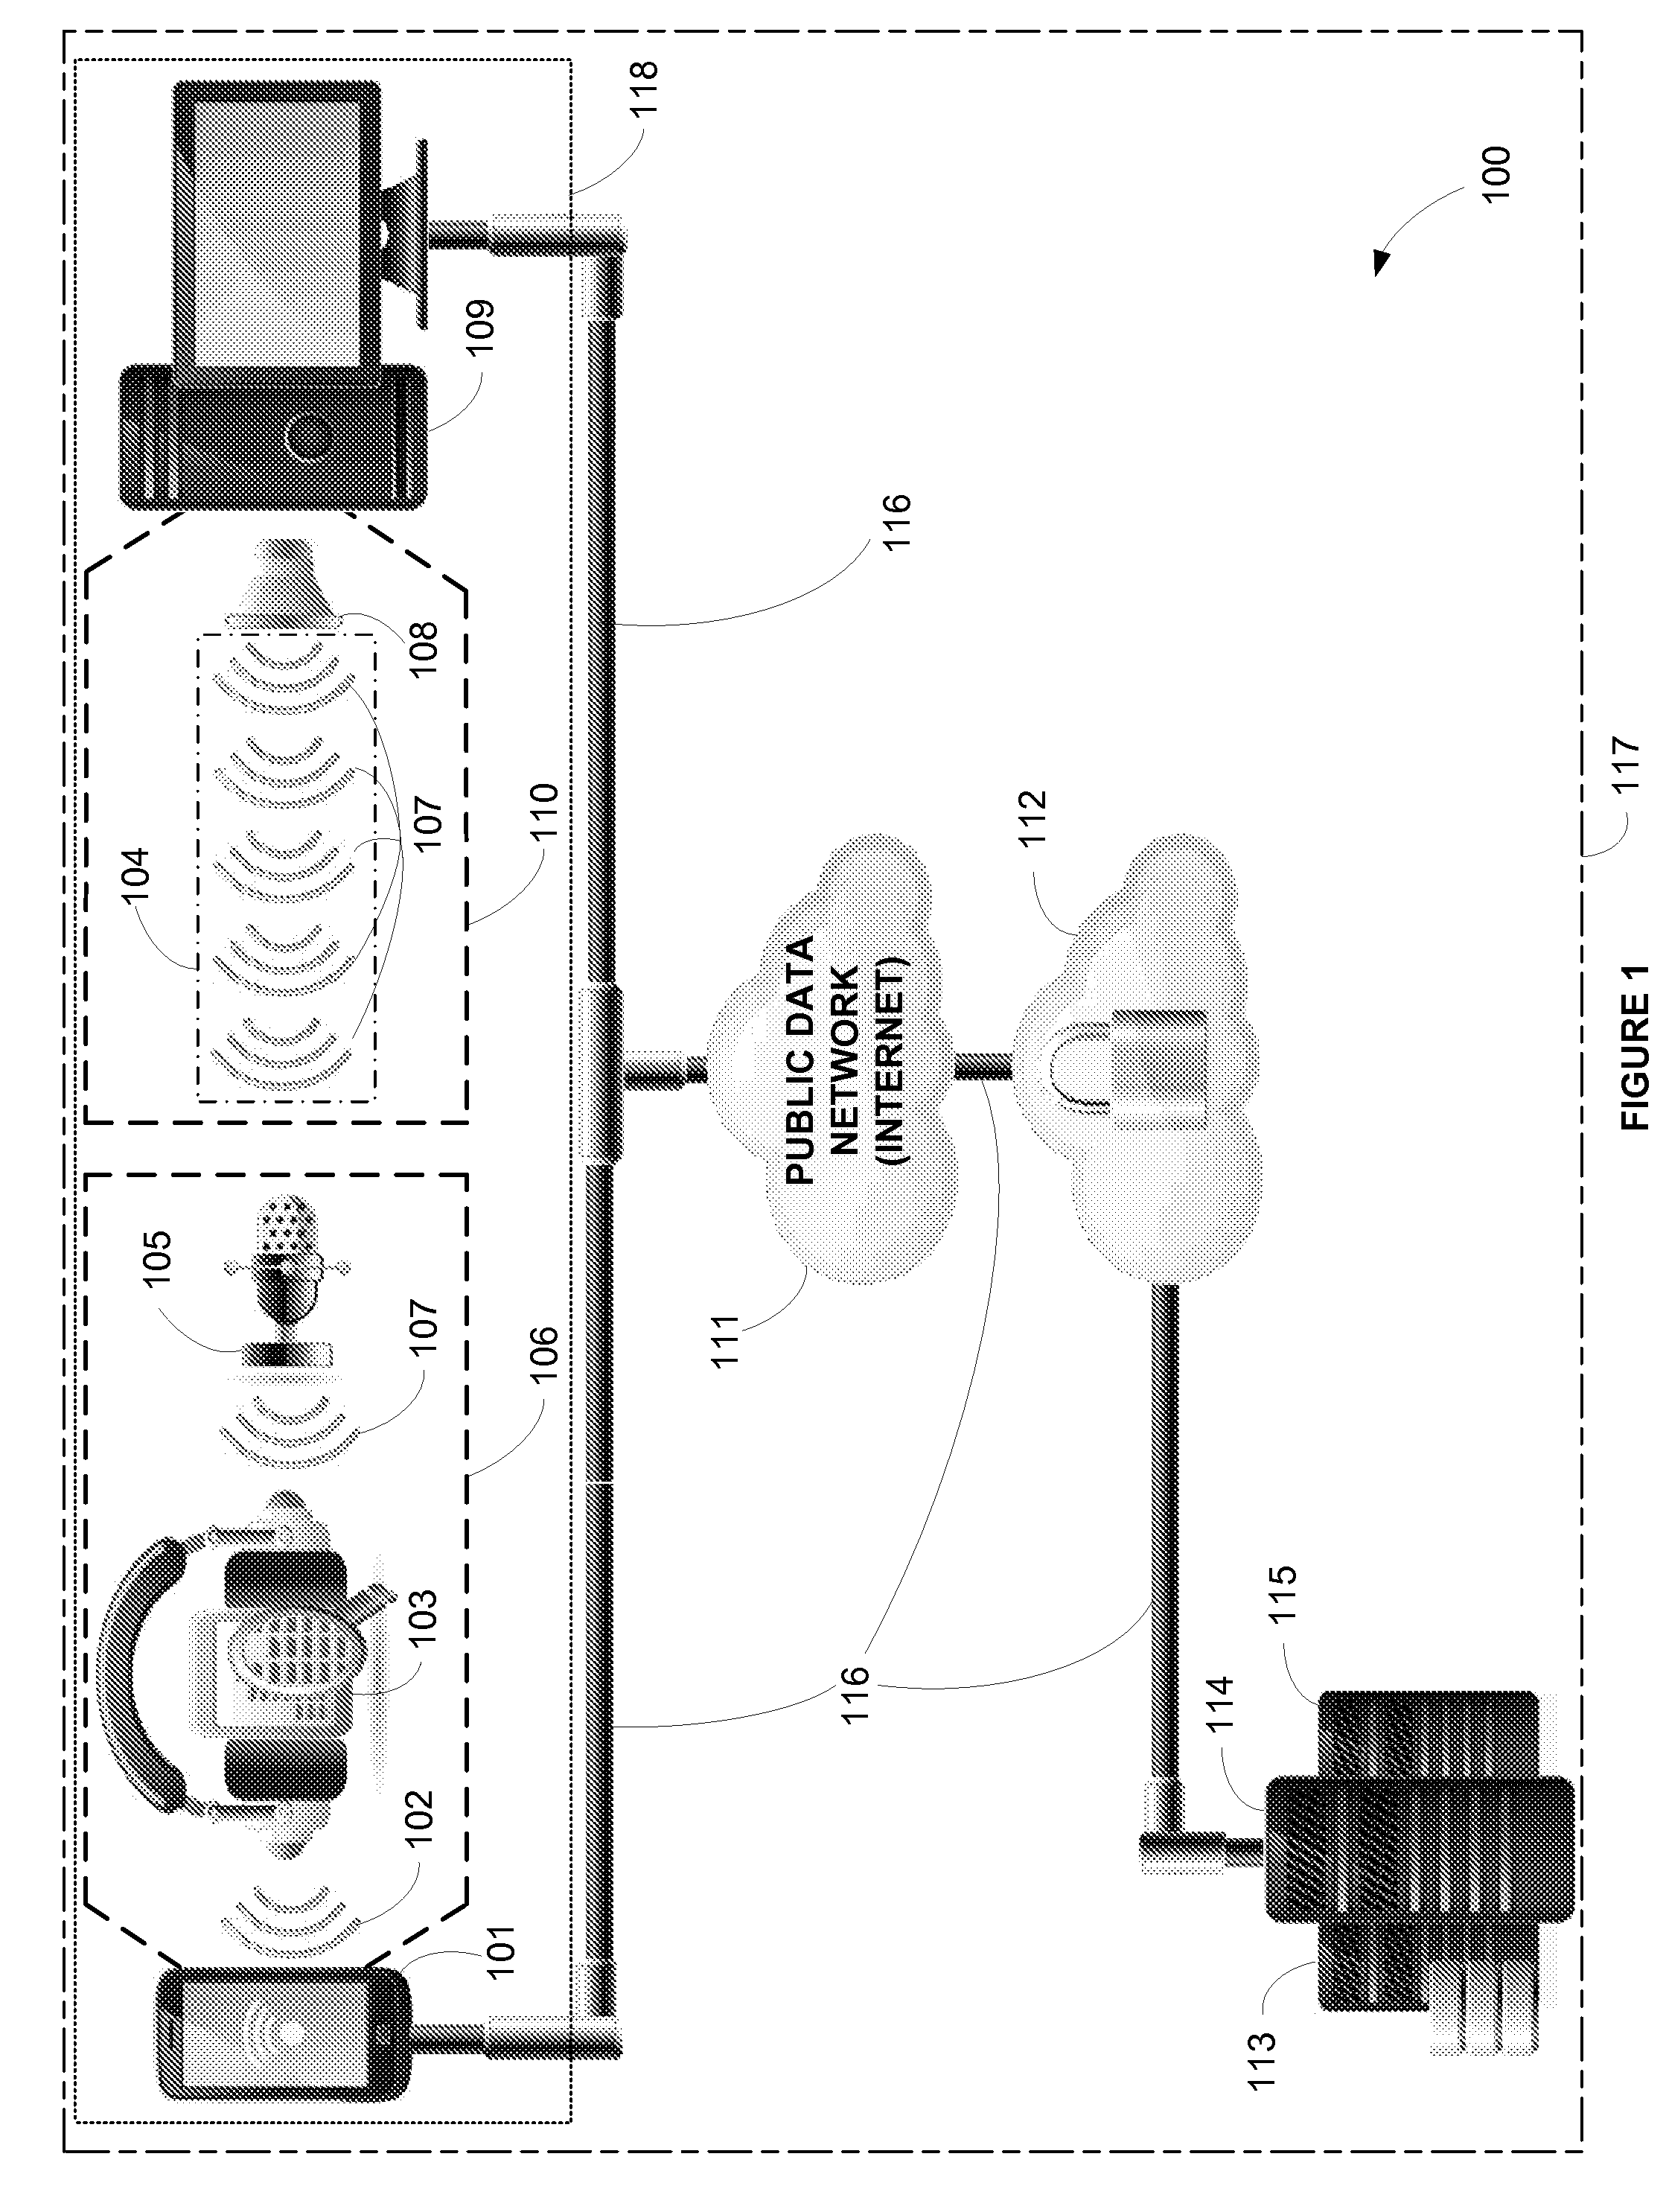 System and method for wirelessly transmitting and receiving customized data broadcasts